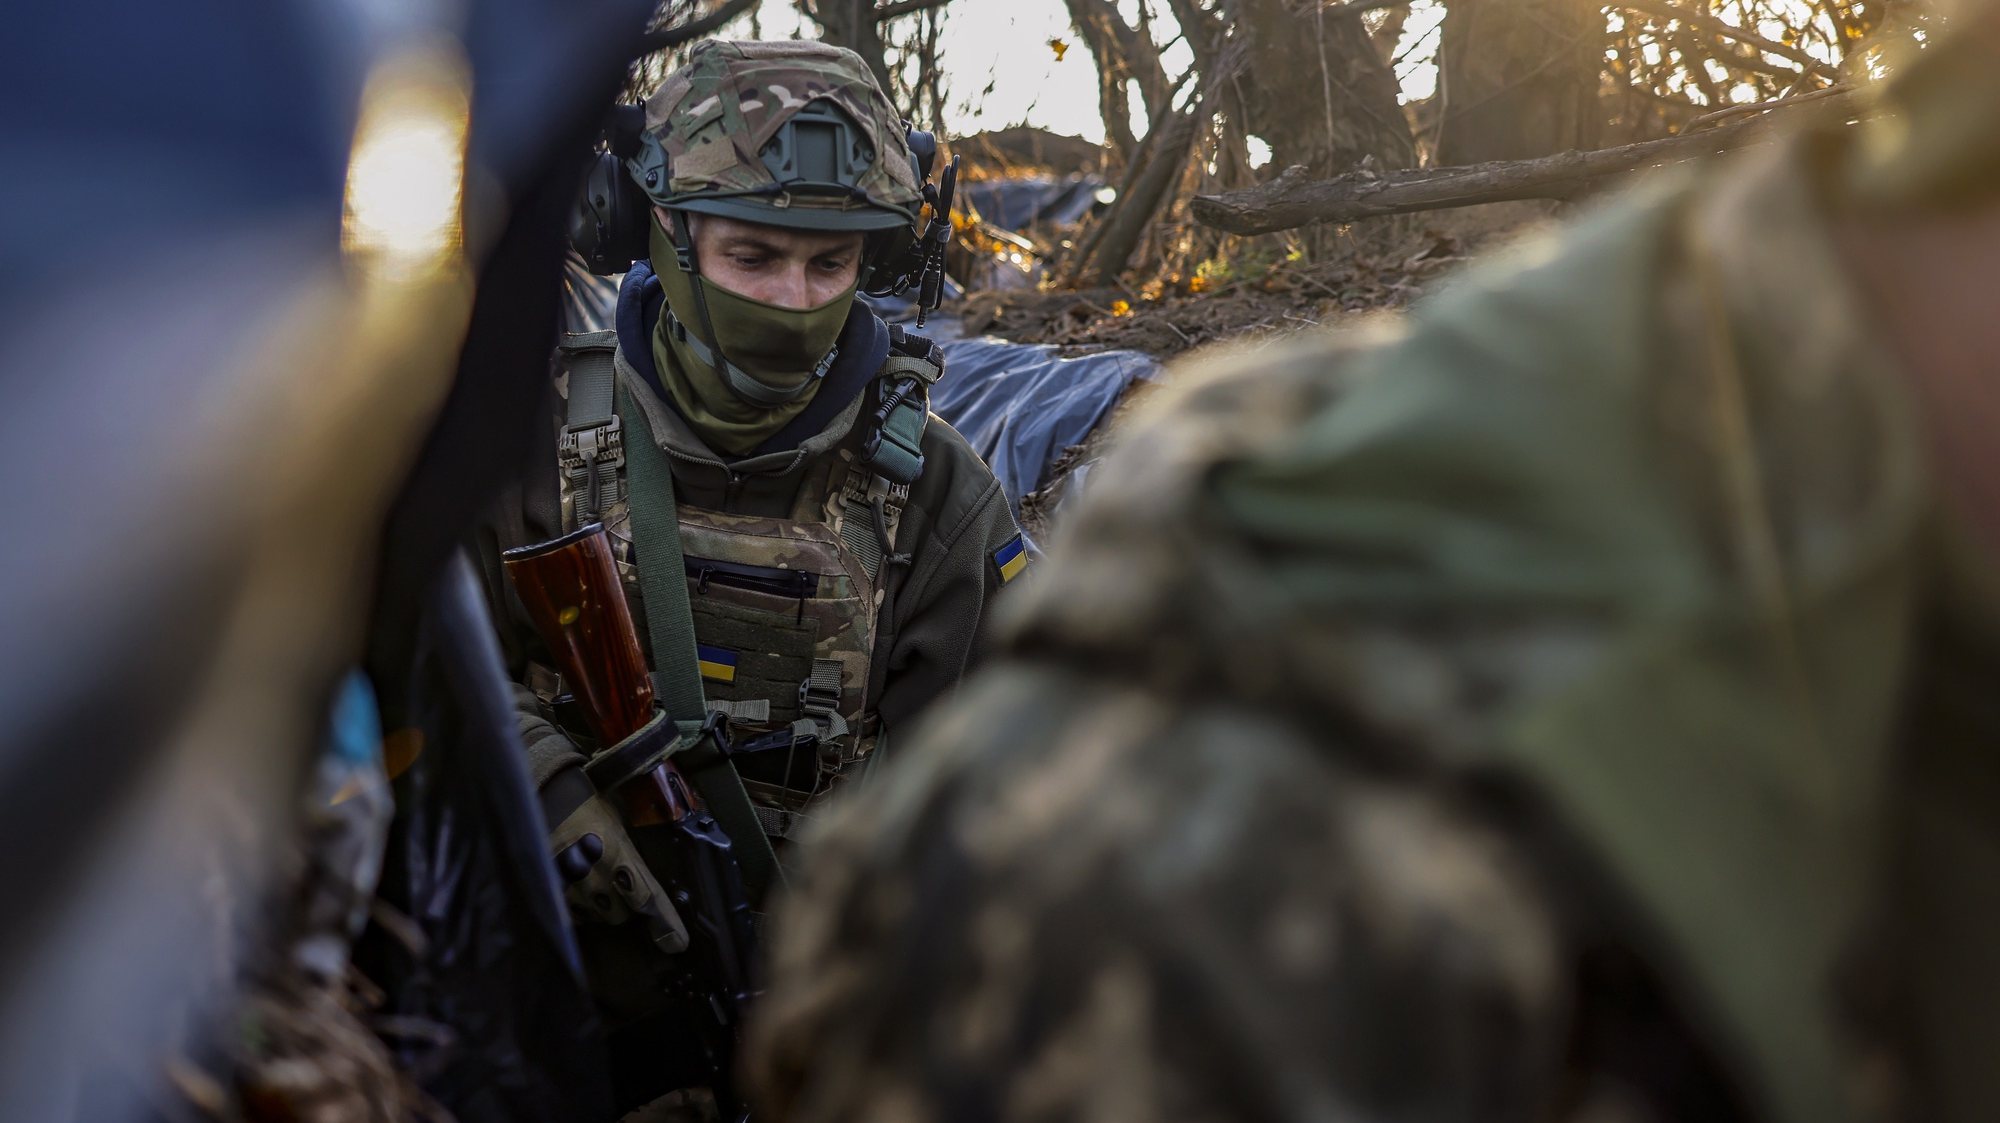 epa10292400 Ukrainian servicemen enter a trench at the frontline at the northern Kherson region, Ukraine, 07 November 2022. Russian troops on 24 February entered Ukrainian territory, starting a conflict that has provoked destruction and a humanitarian crisis.  EPA/HANNIBAL HANSCHKE